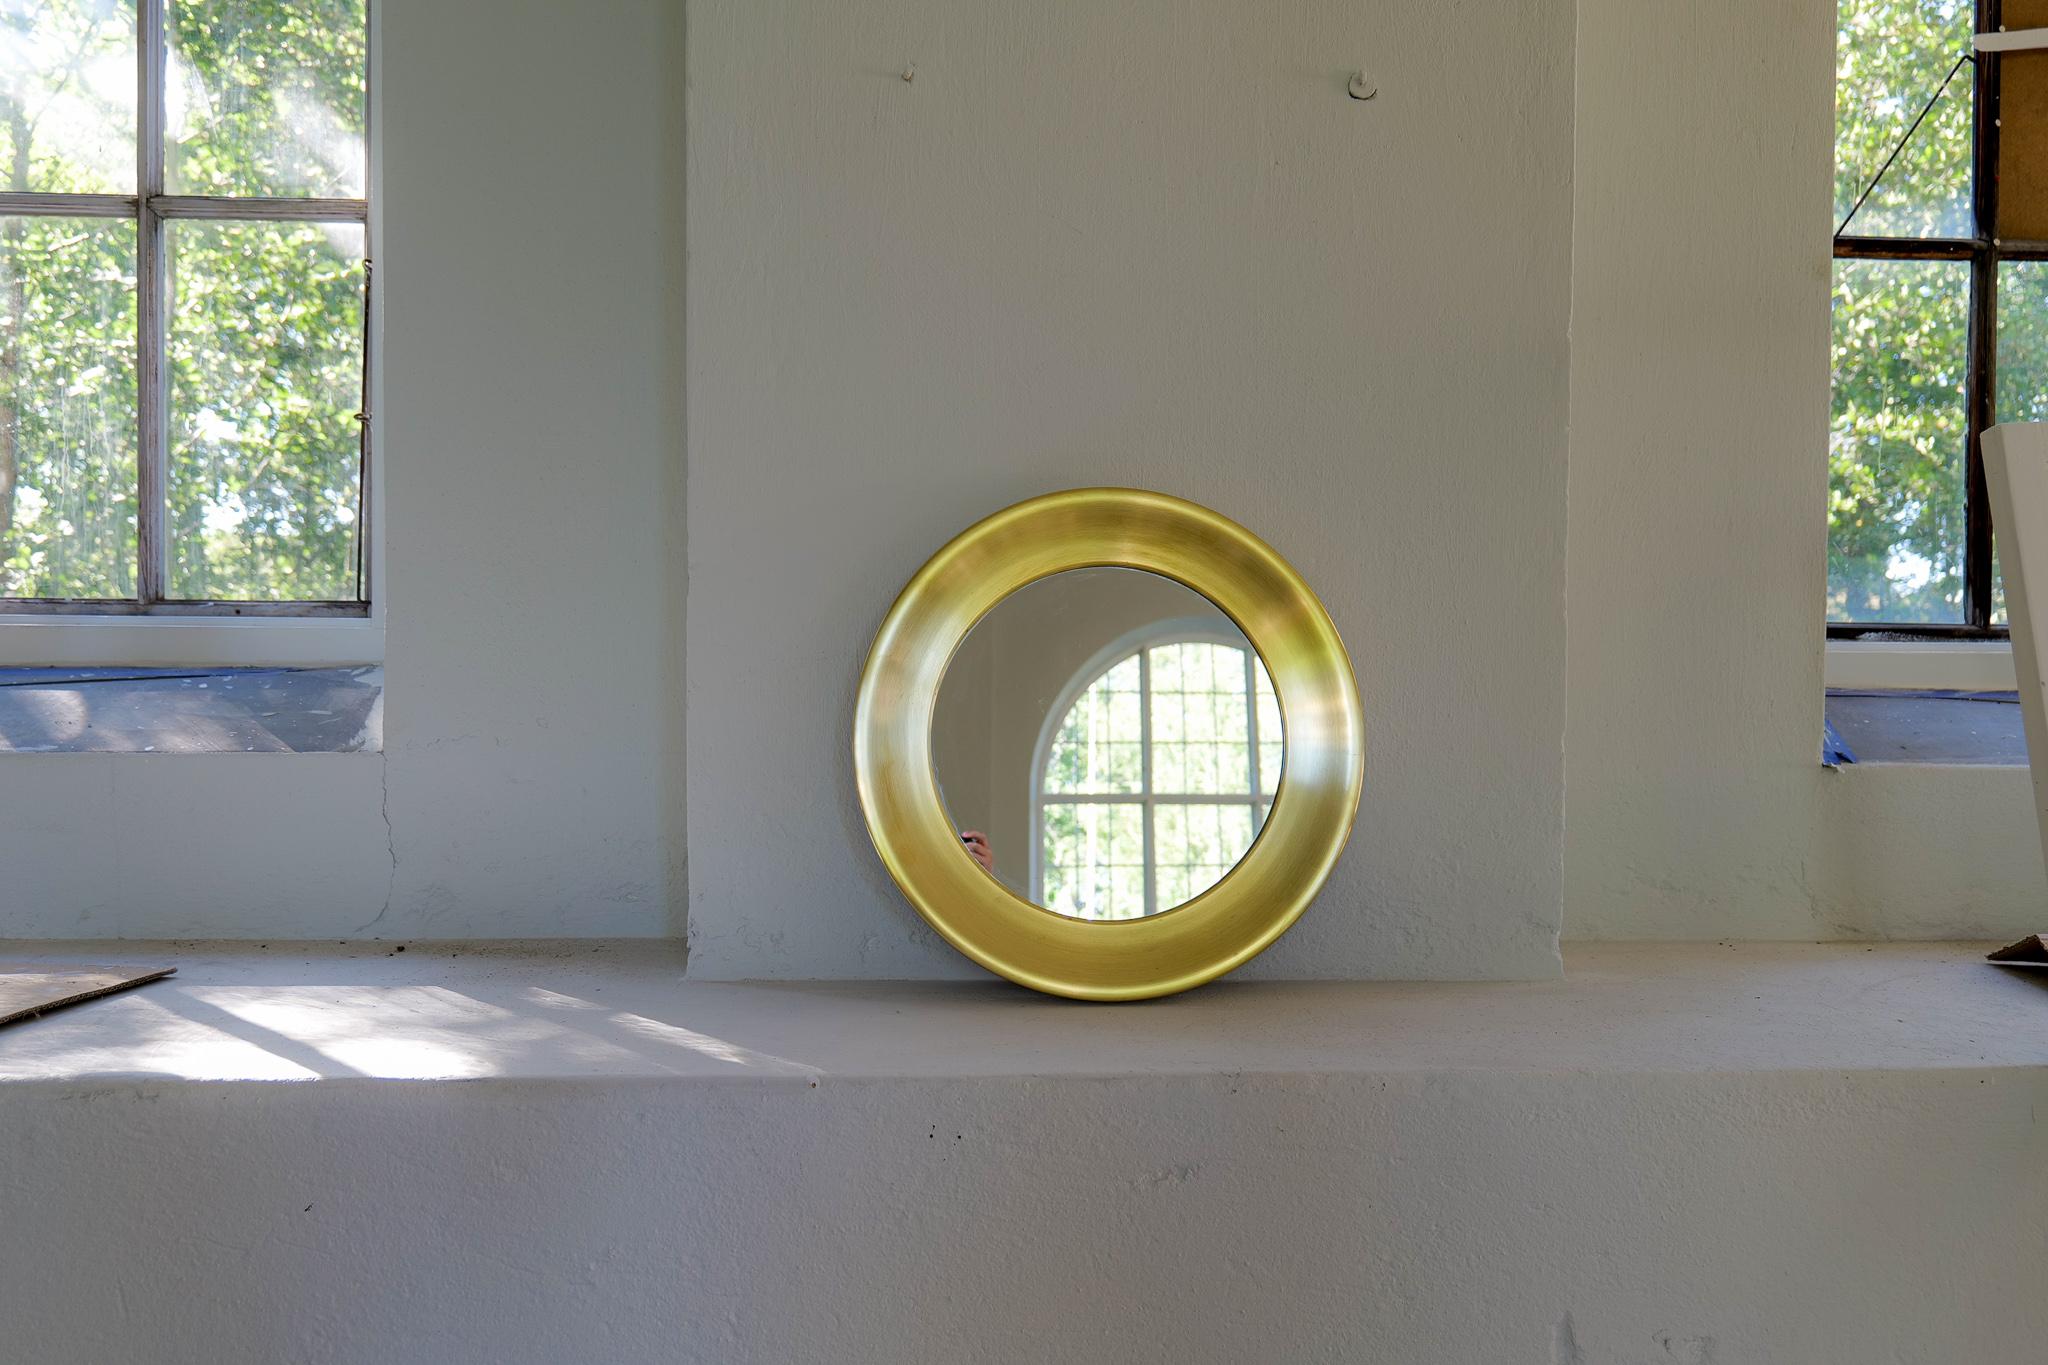 Swedish Midcentury Modern Rounded Brass Mirror by Glasmäster in Markaryd, Sweden, 1960s For Sale